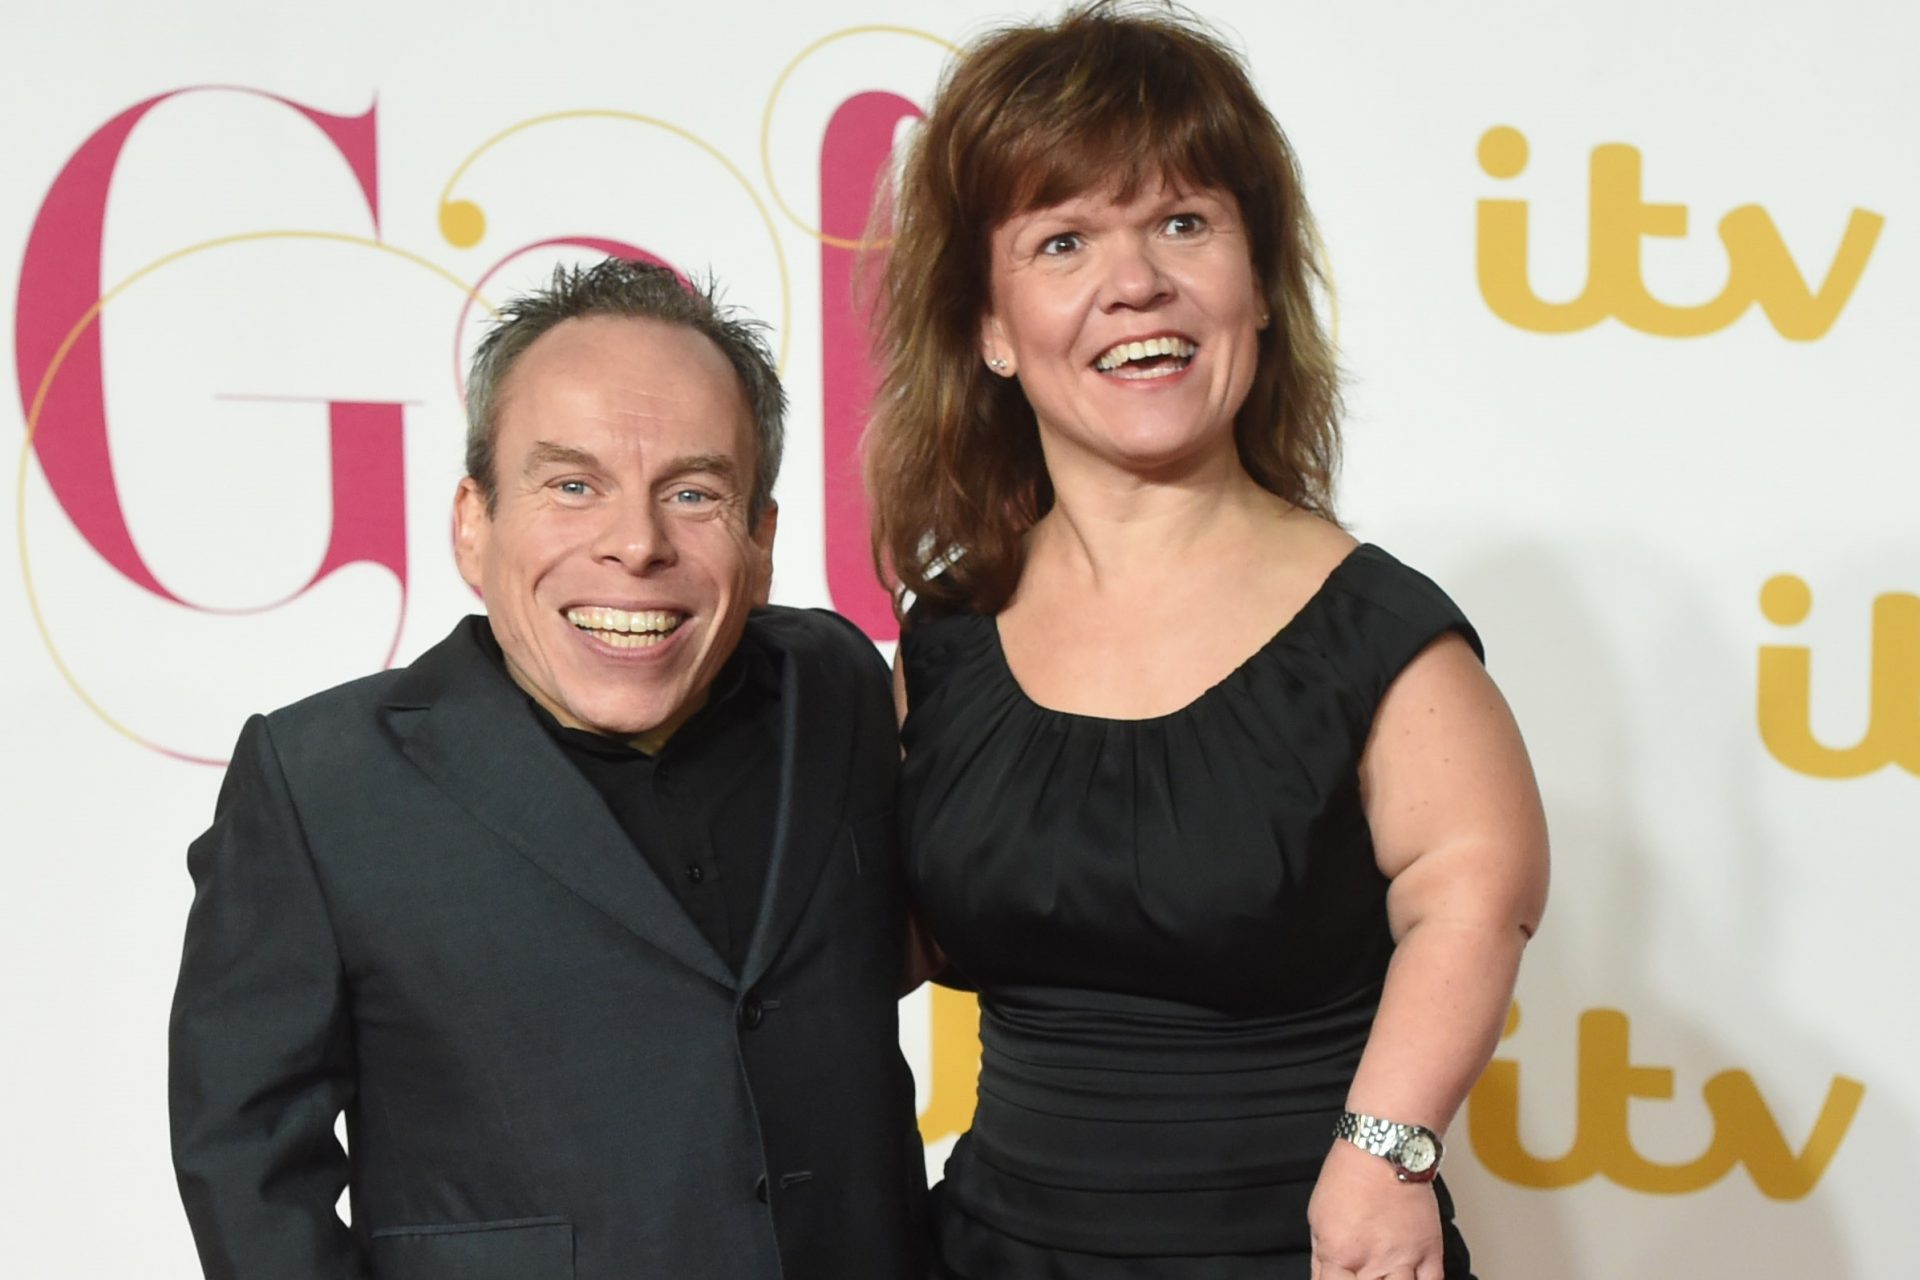 Warwick Davis announces that his wife has died at 53